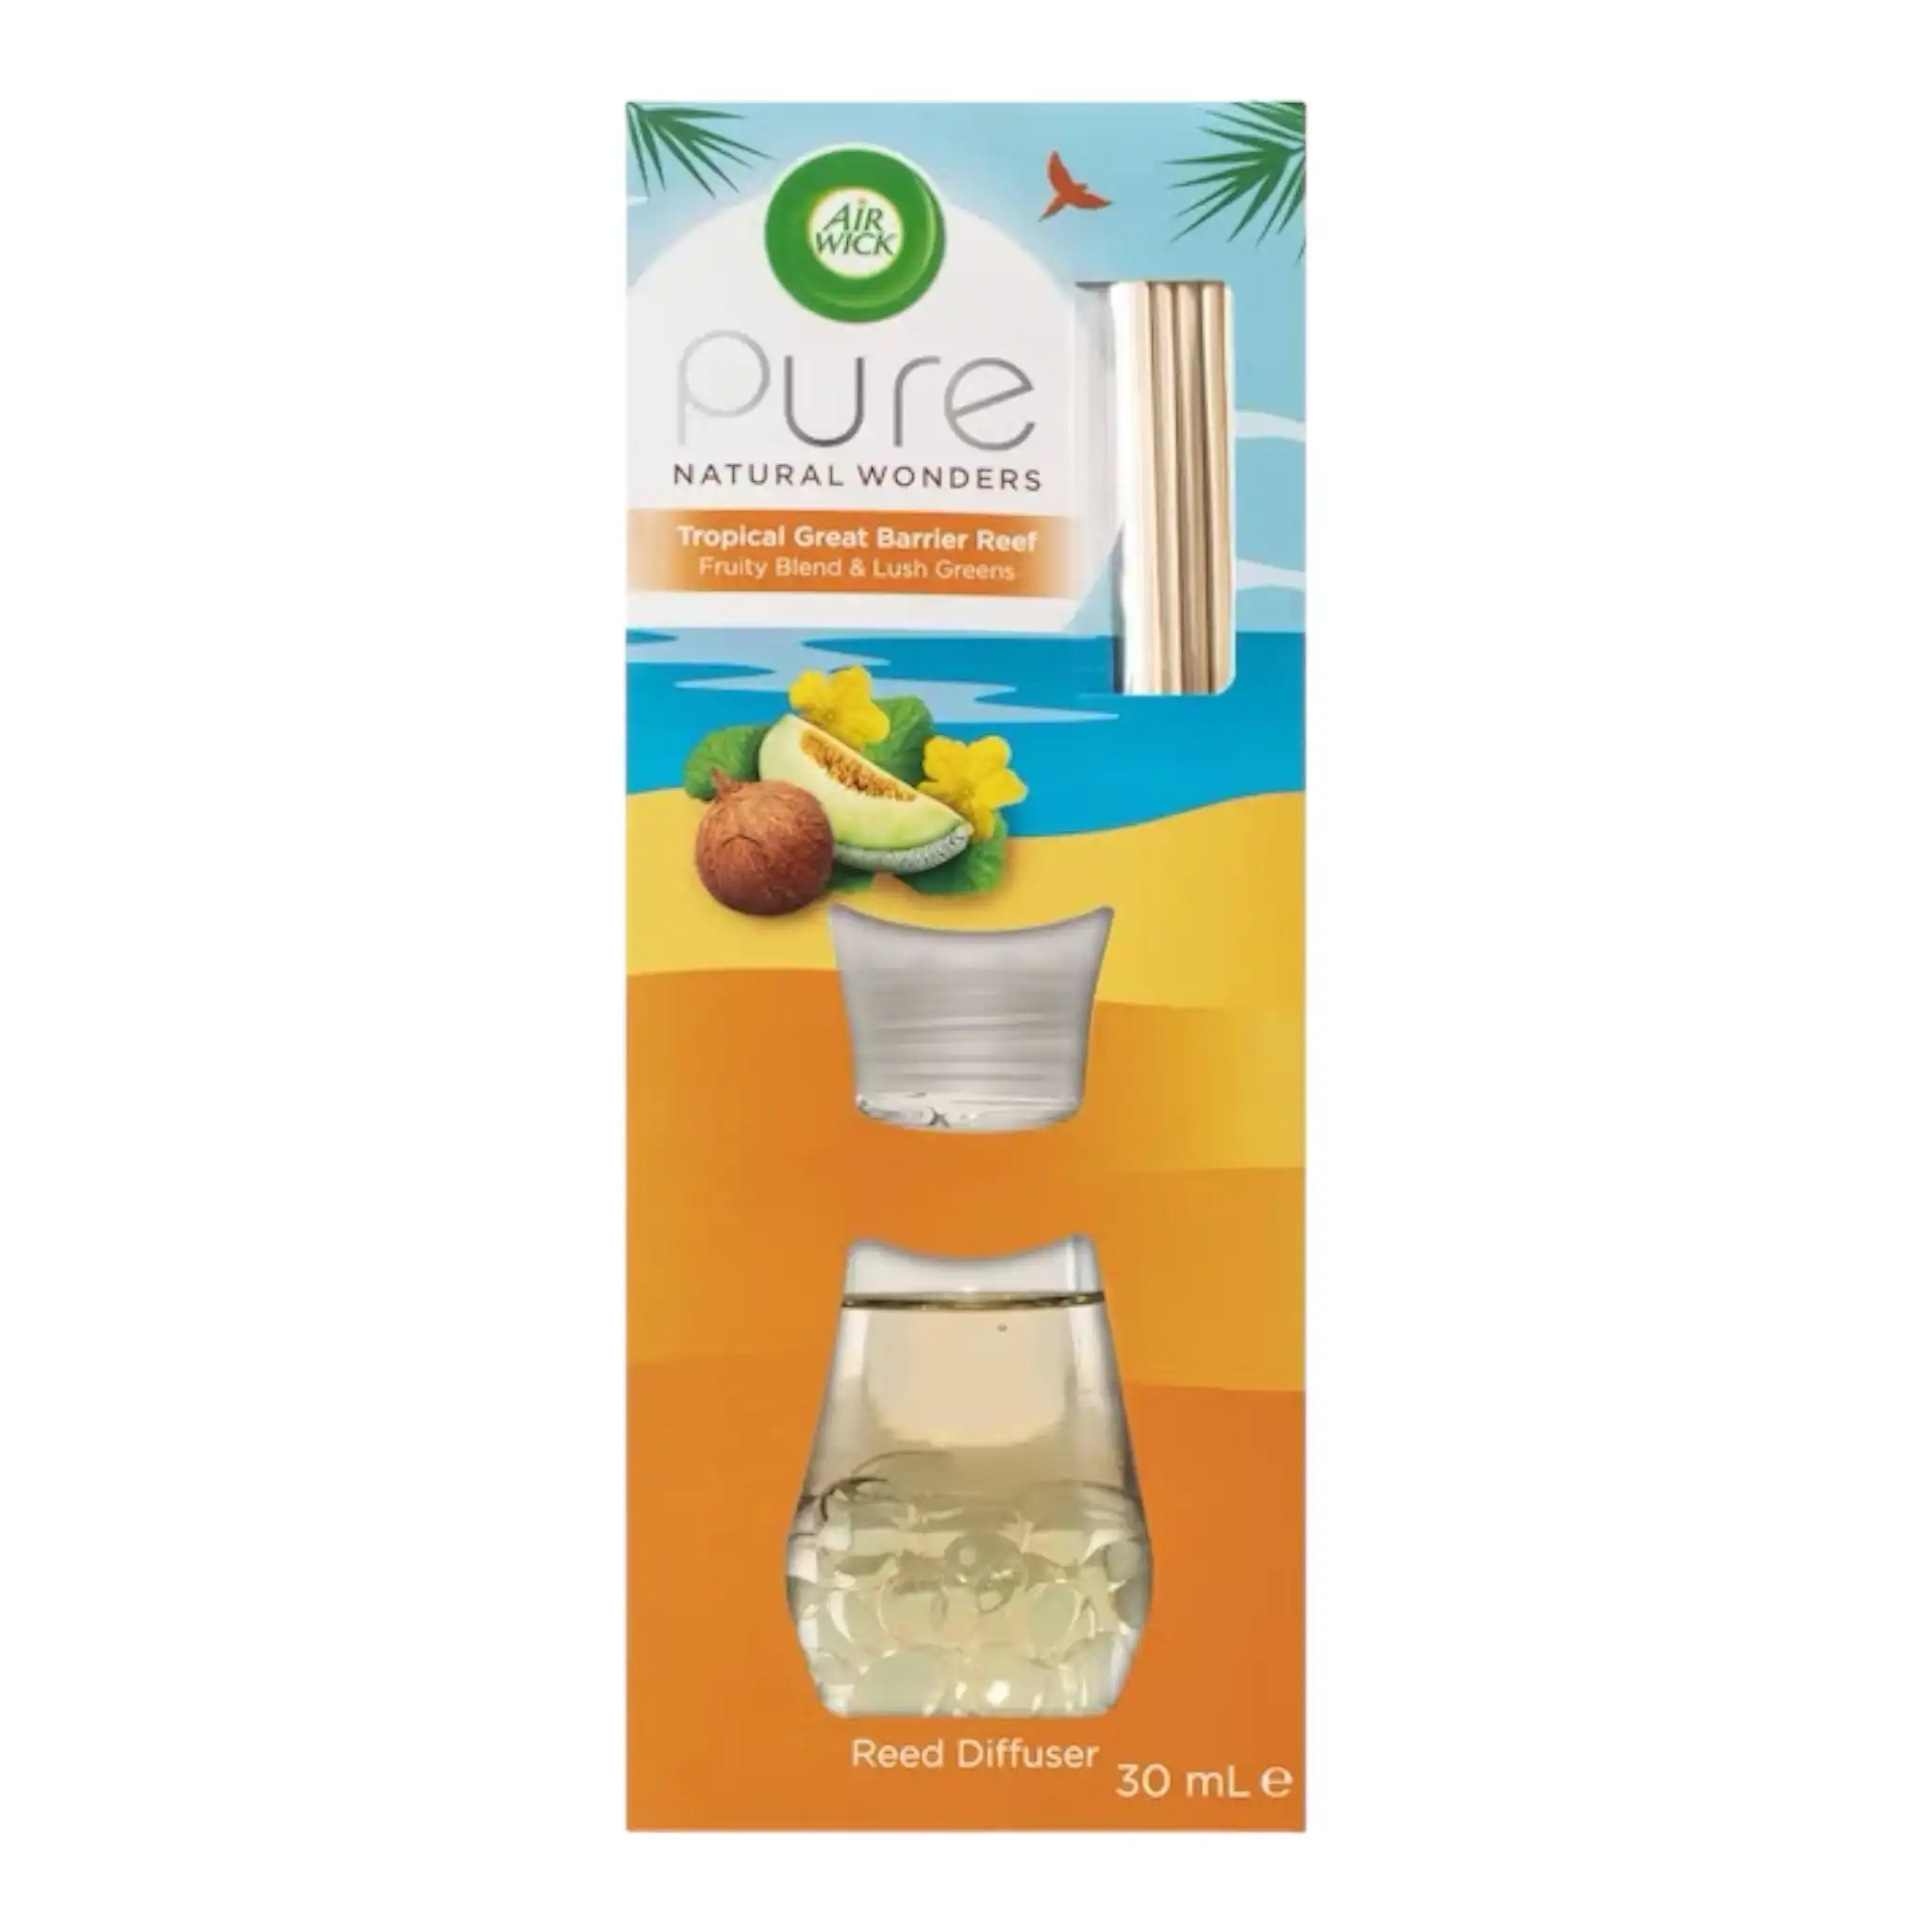 Airwick Pure Reed Diffuser Tropical Great Barrier Reef 30ml